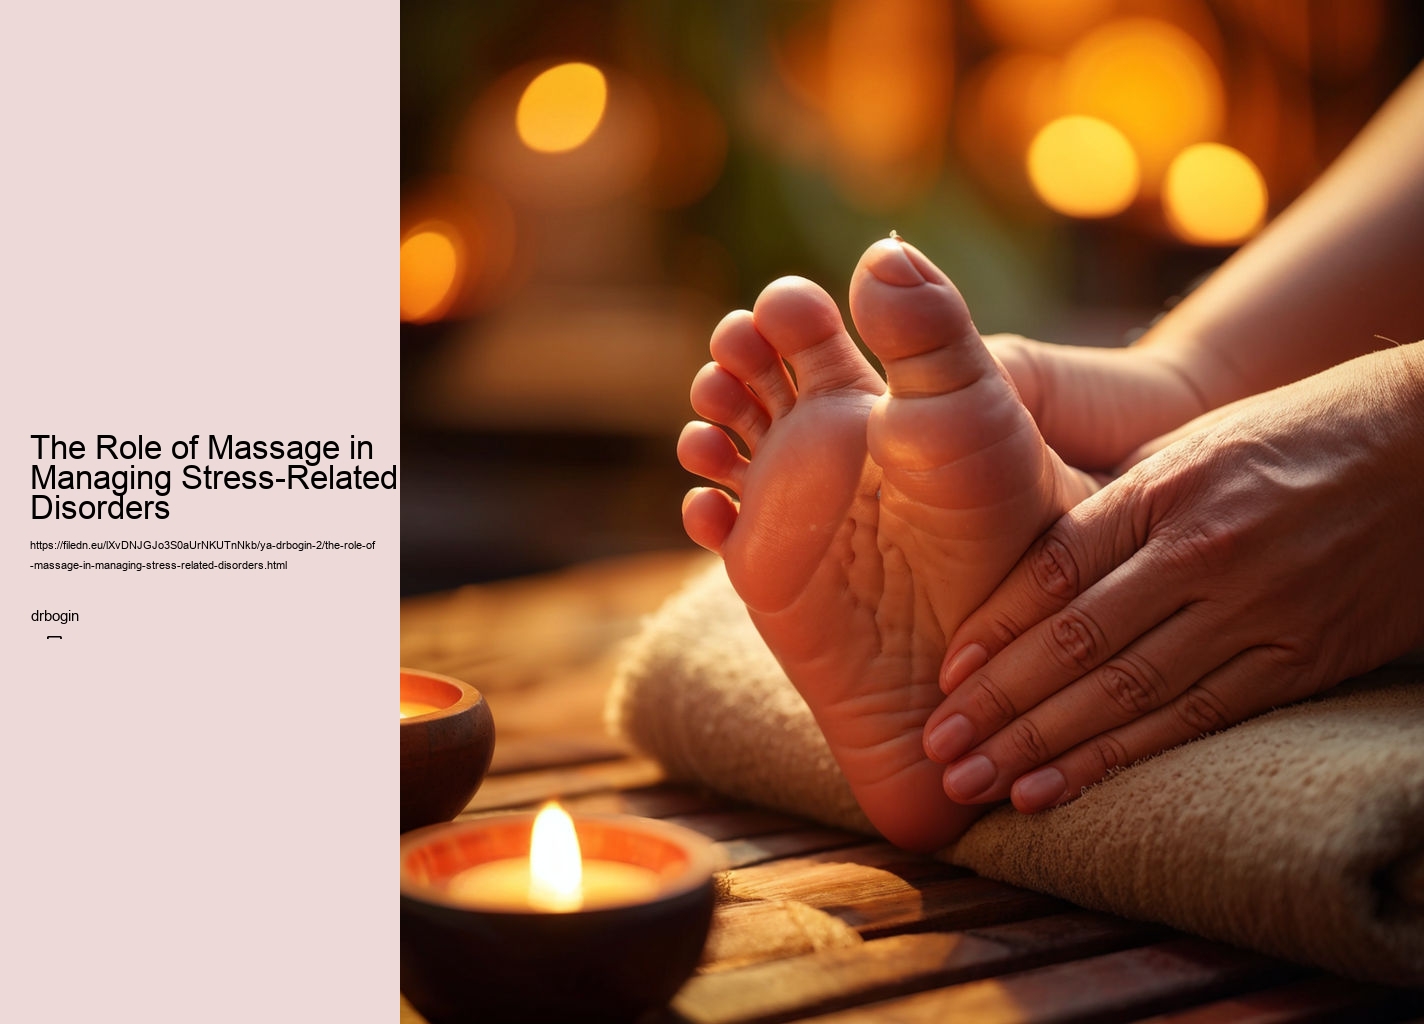 The Role of Massage in Managing Stress-Related Disorders